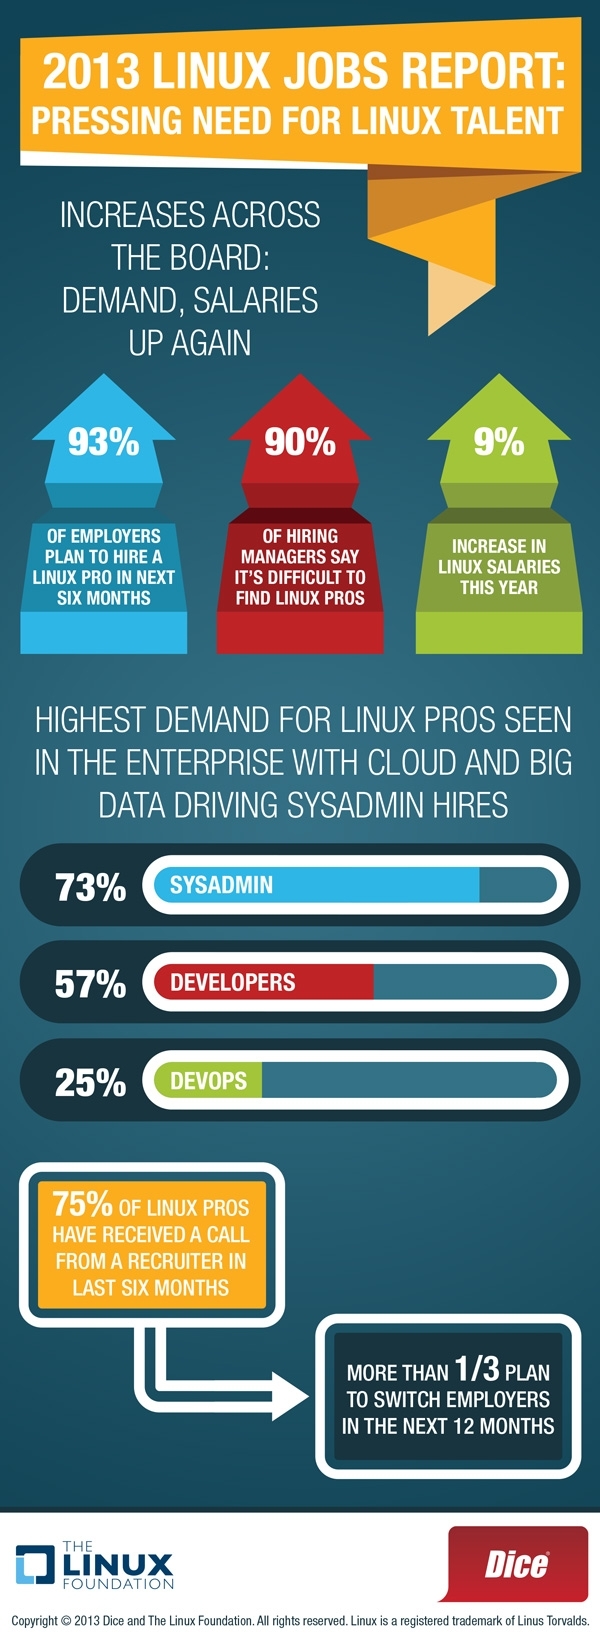 Linux Foundation infographic